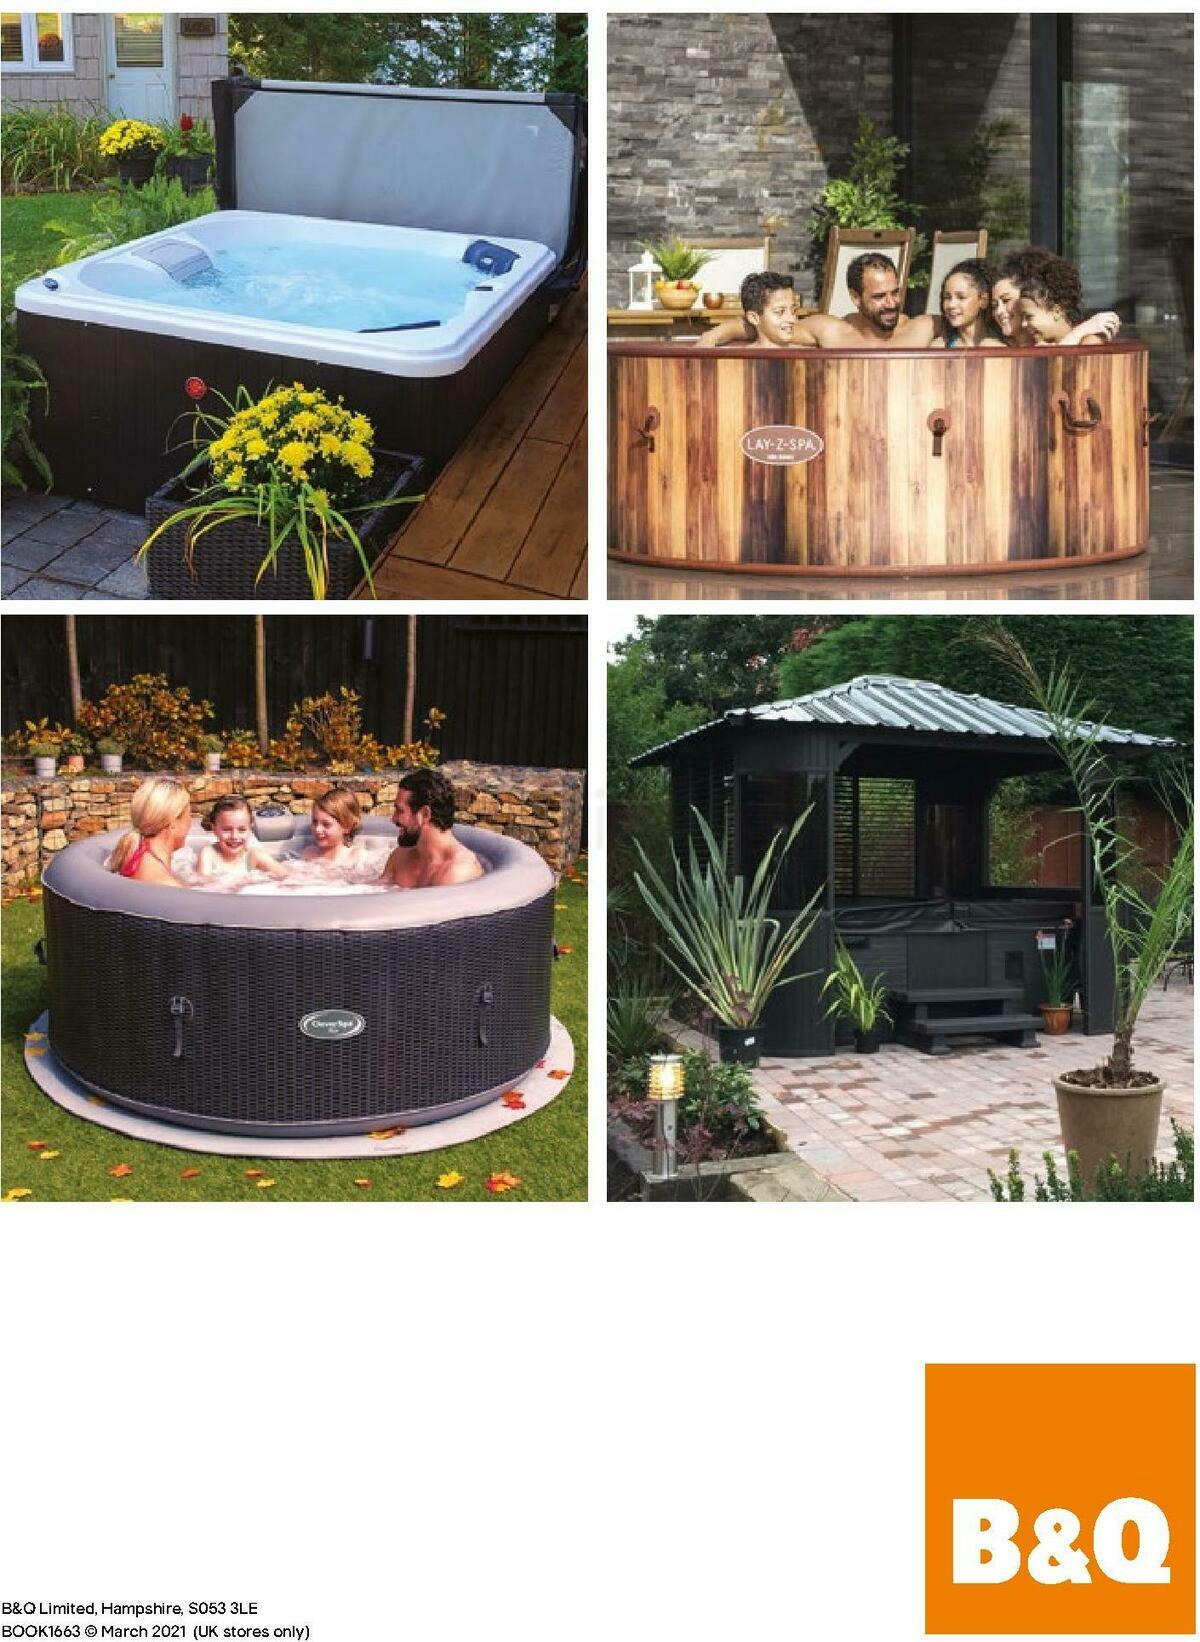 B&Q Hot Tub & Spa Collections Offers from 1 March